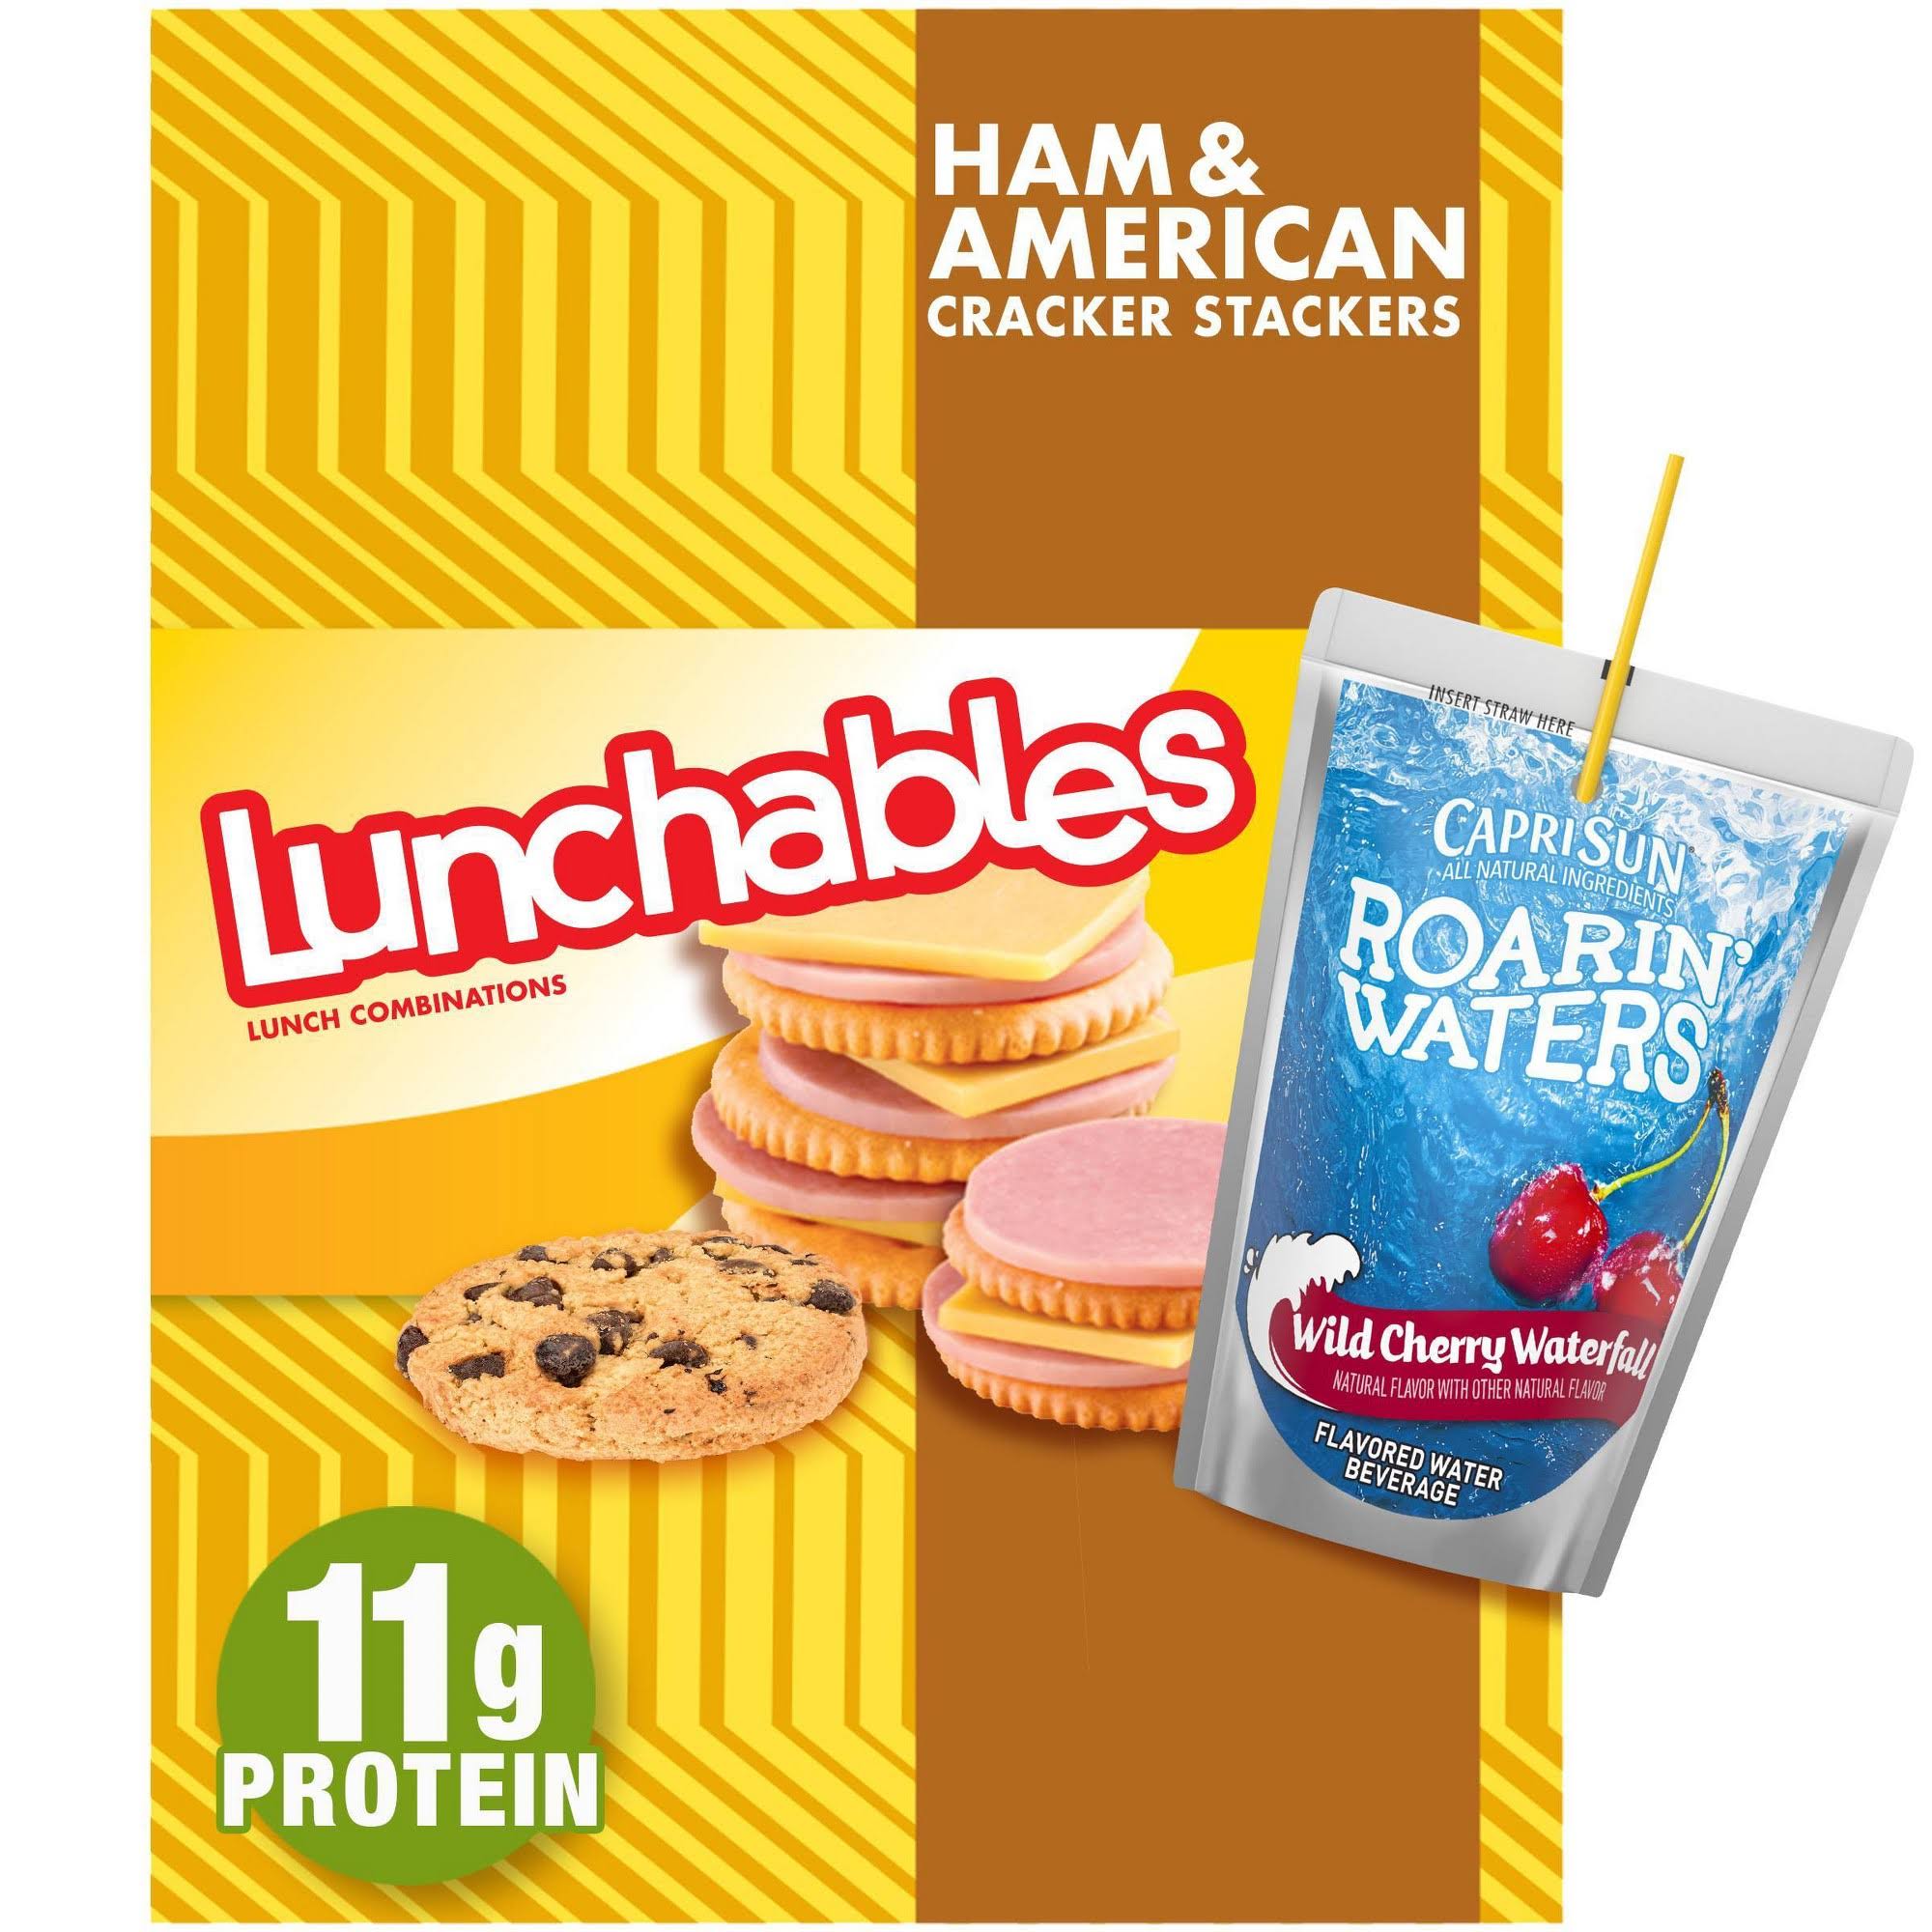 Lunchables Lunch Combinations, Ham & American, Cracker Stackers